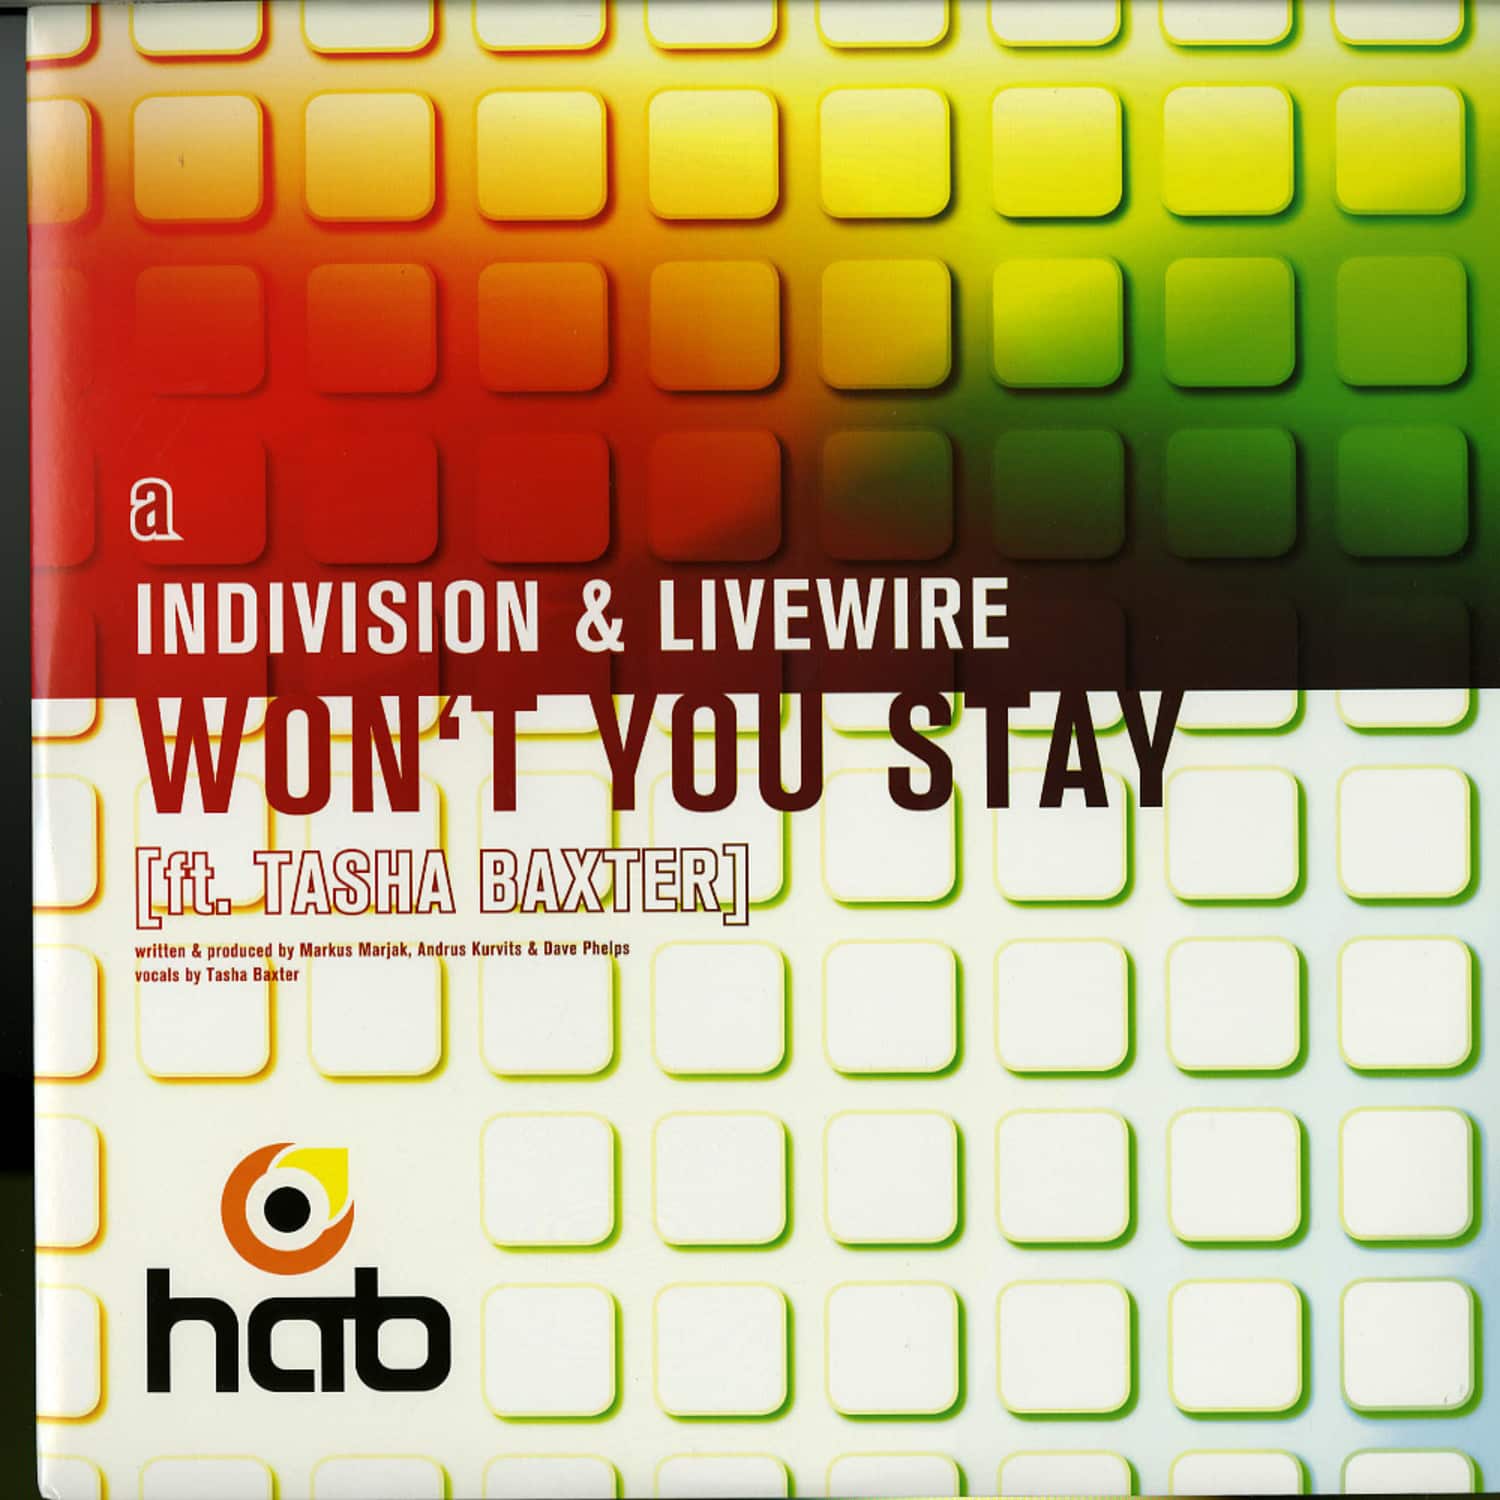 Indivision & Livewire - WON T YOU STAY FEAT. TASHA BAXTER